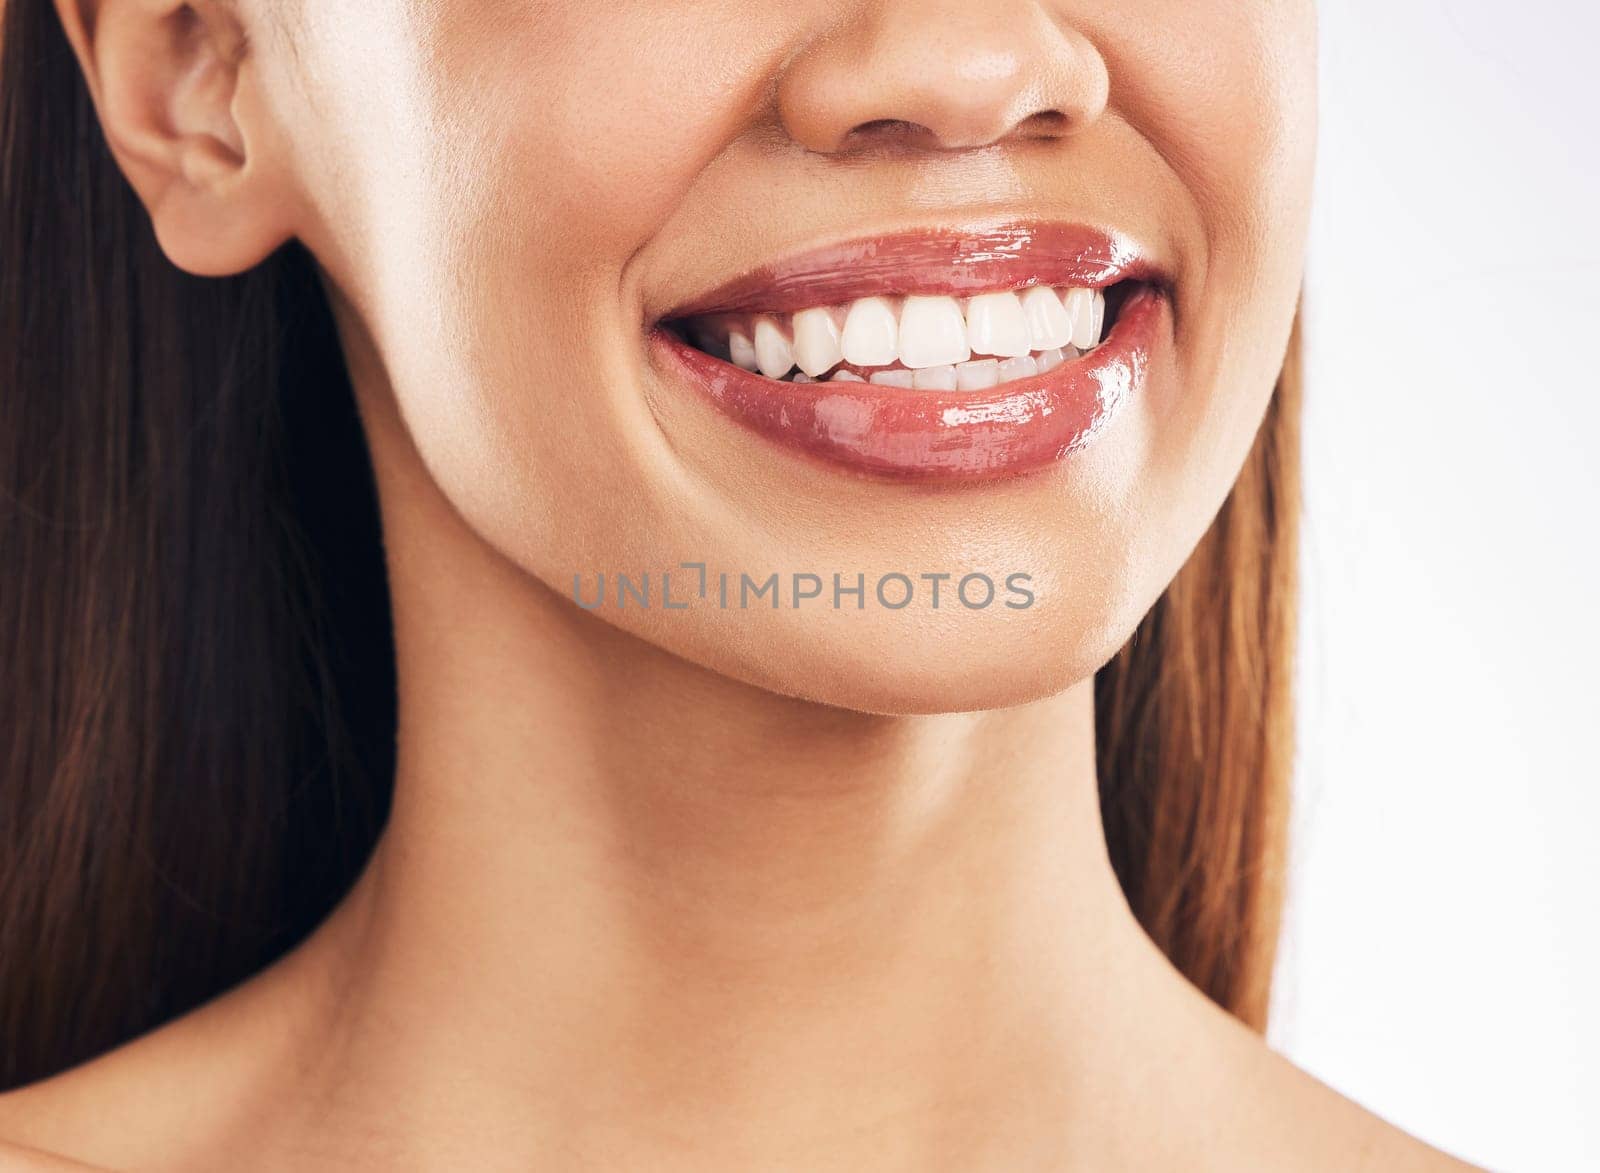 Woman, mouth and teeth with dental and smile, happiness with beauty and oral hygiene isolated on white background. Health, wellness and happy female model, orthodontics and lips with shine in studio.